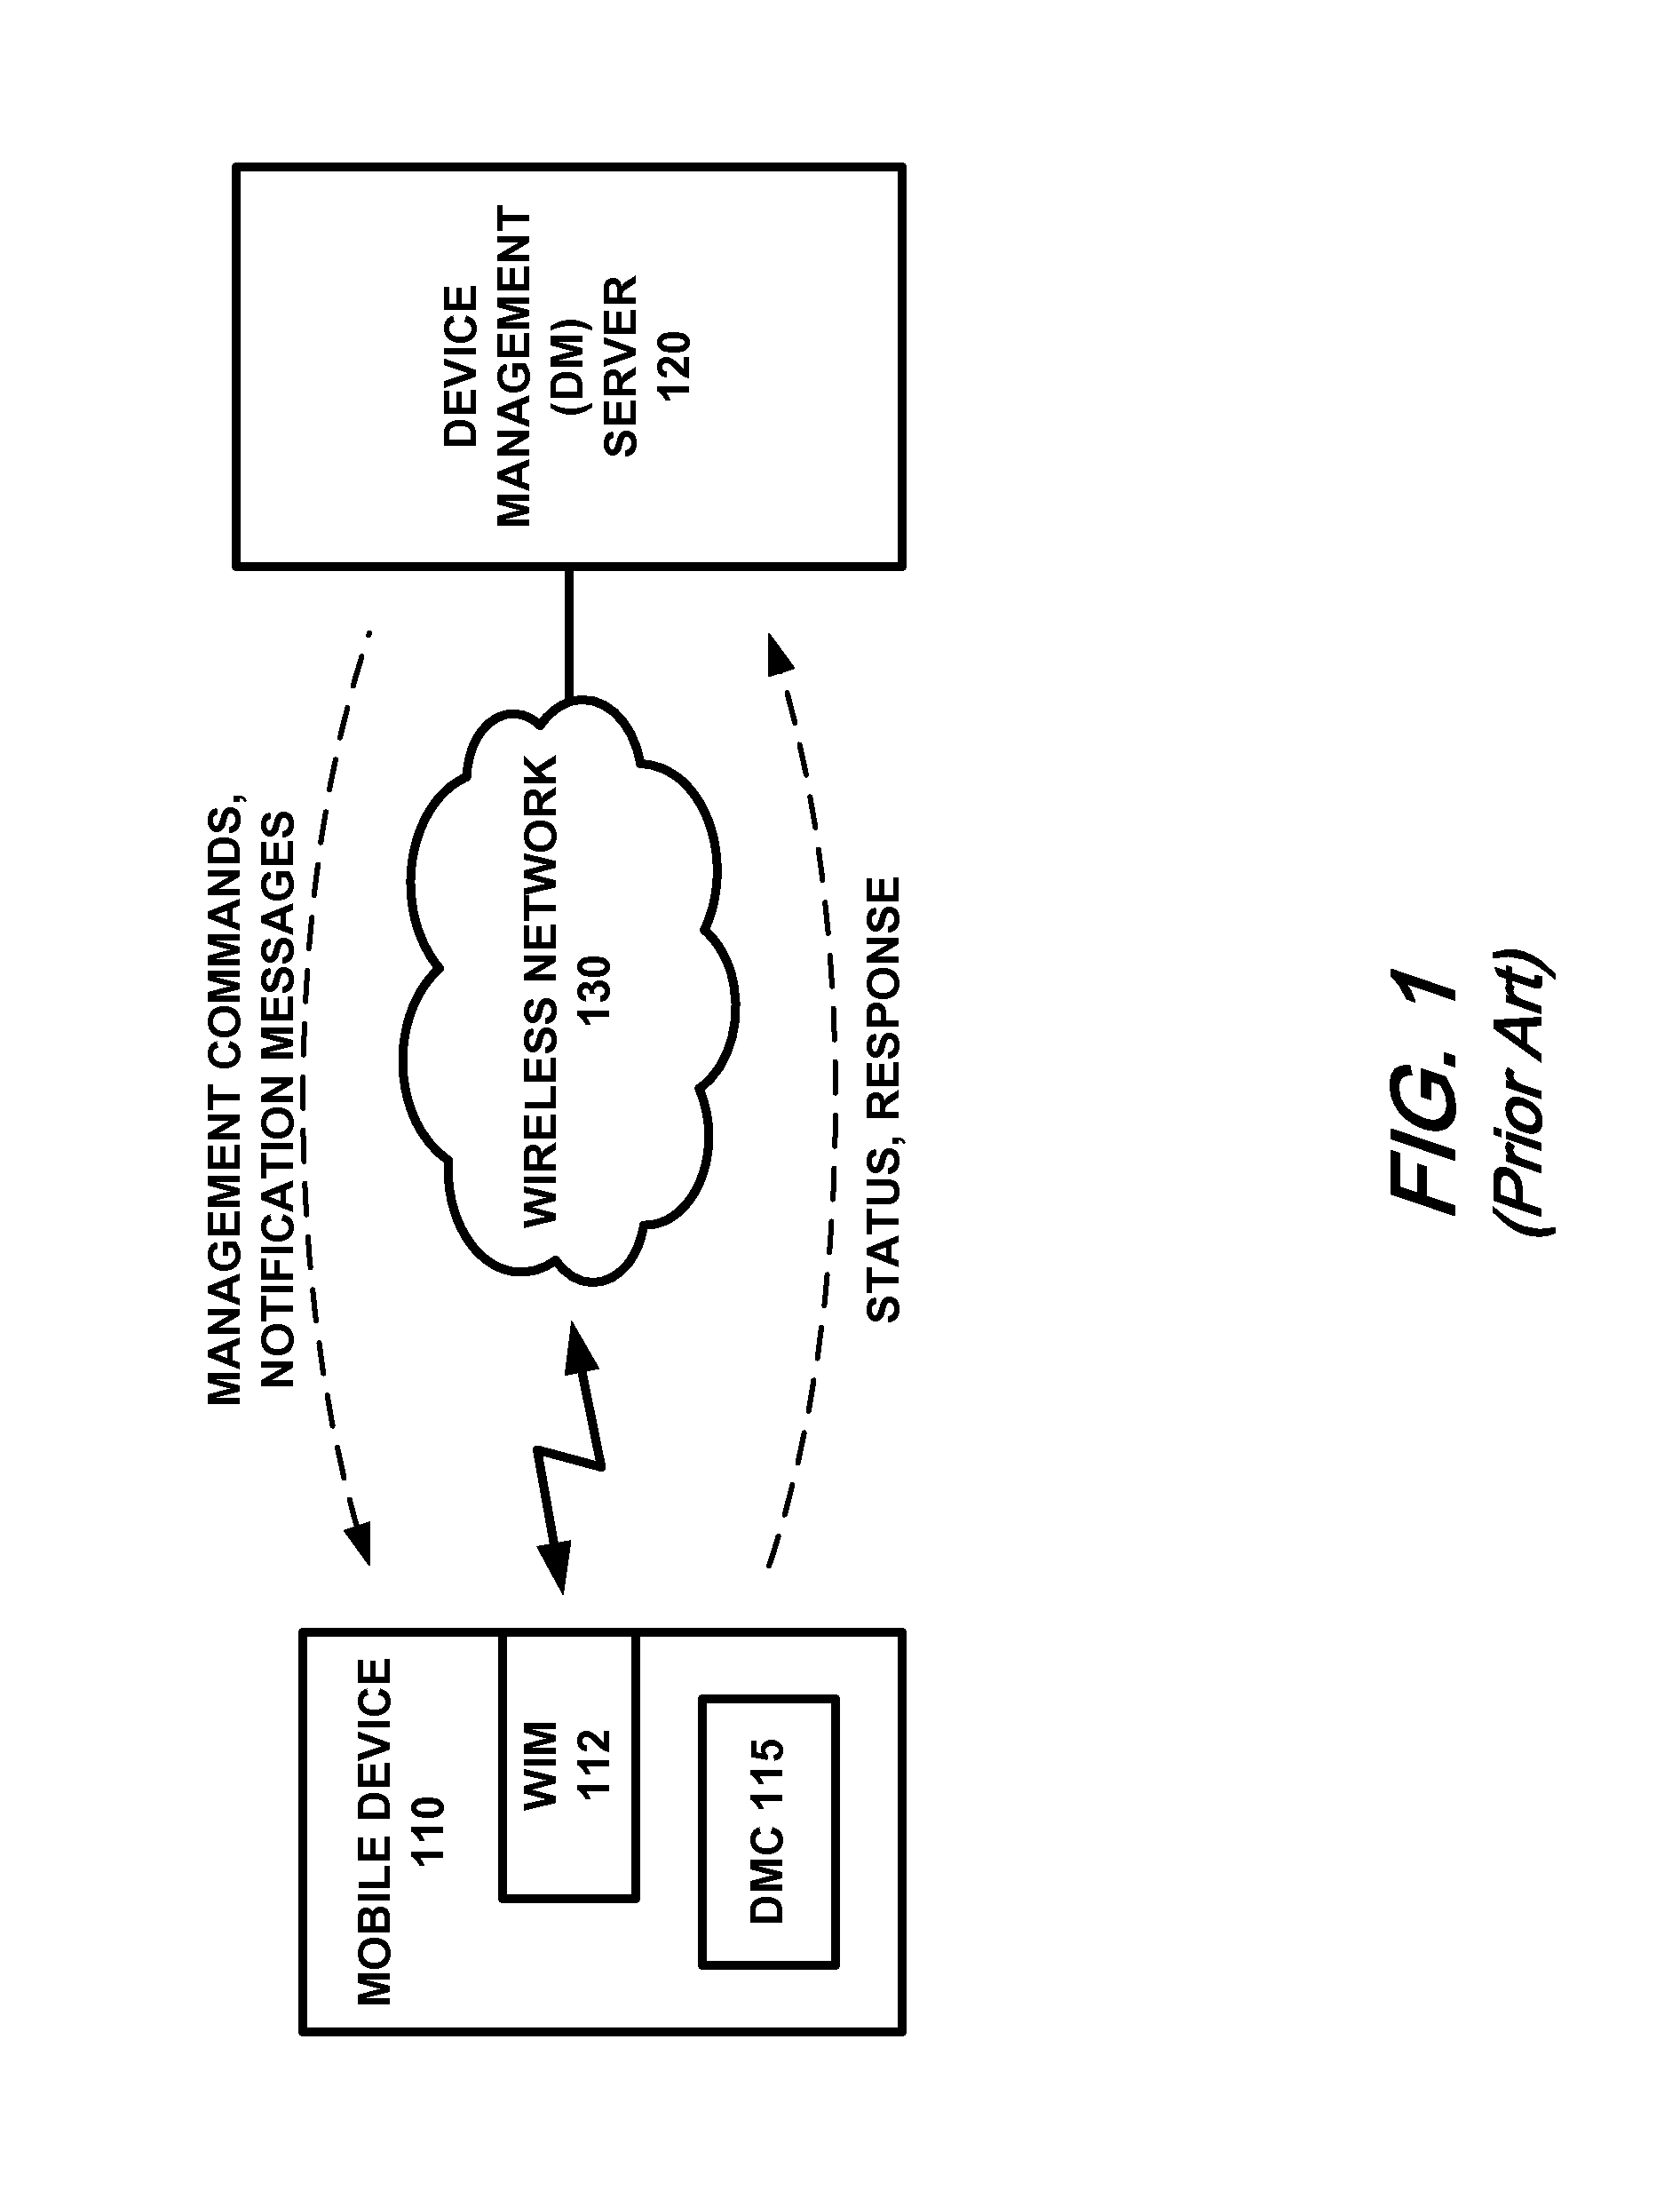 System and method to provide remote device management for mobile virtualized platforms